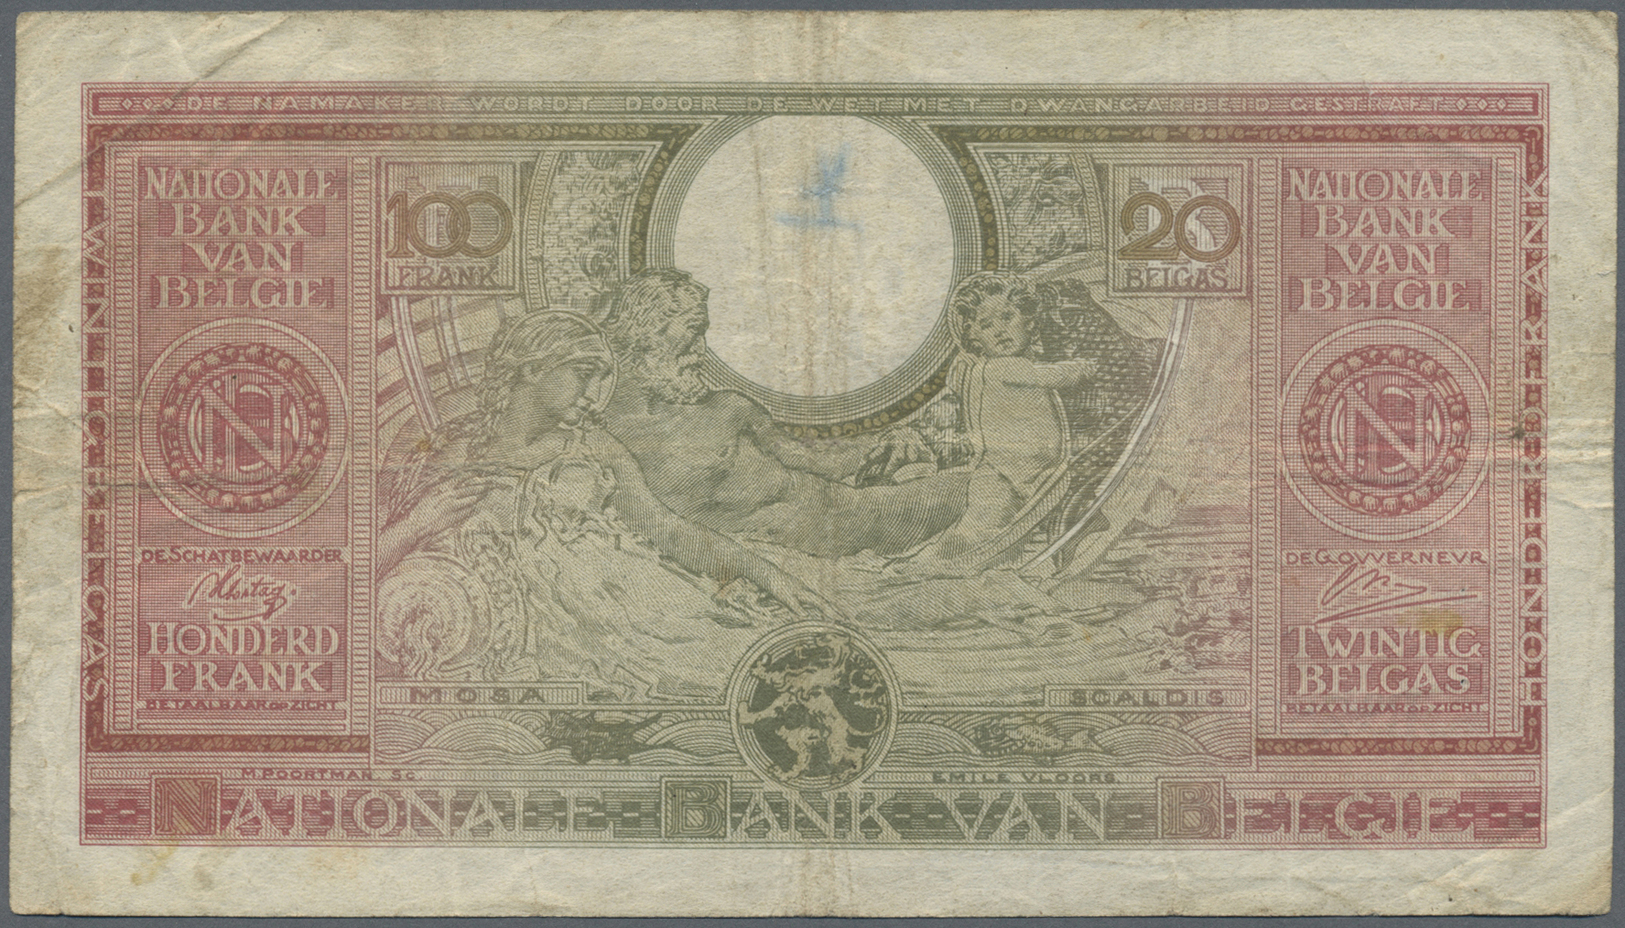 00282 Belgium / Belgien: 100 Francs = 20 Belgas 1943, P.123, Small Graffiti At Upper Center, Several Folds And Stained P - [ 1] …-1830 : Before Independence